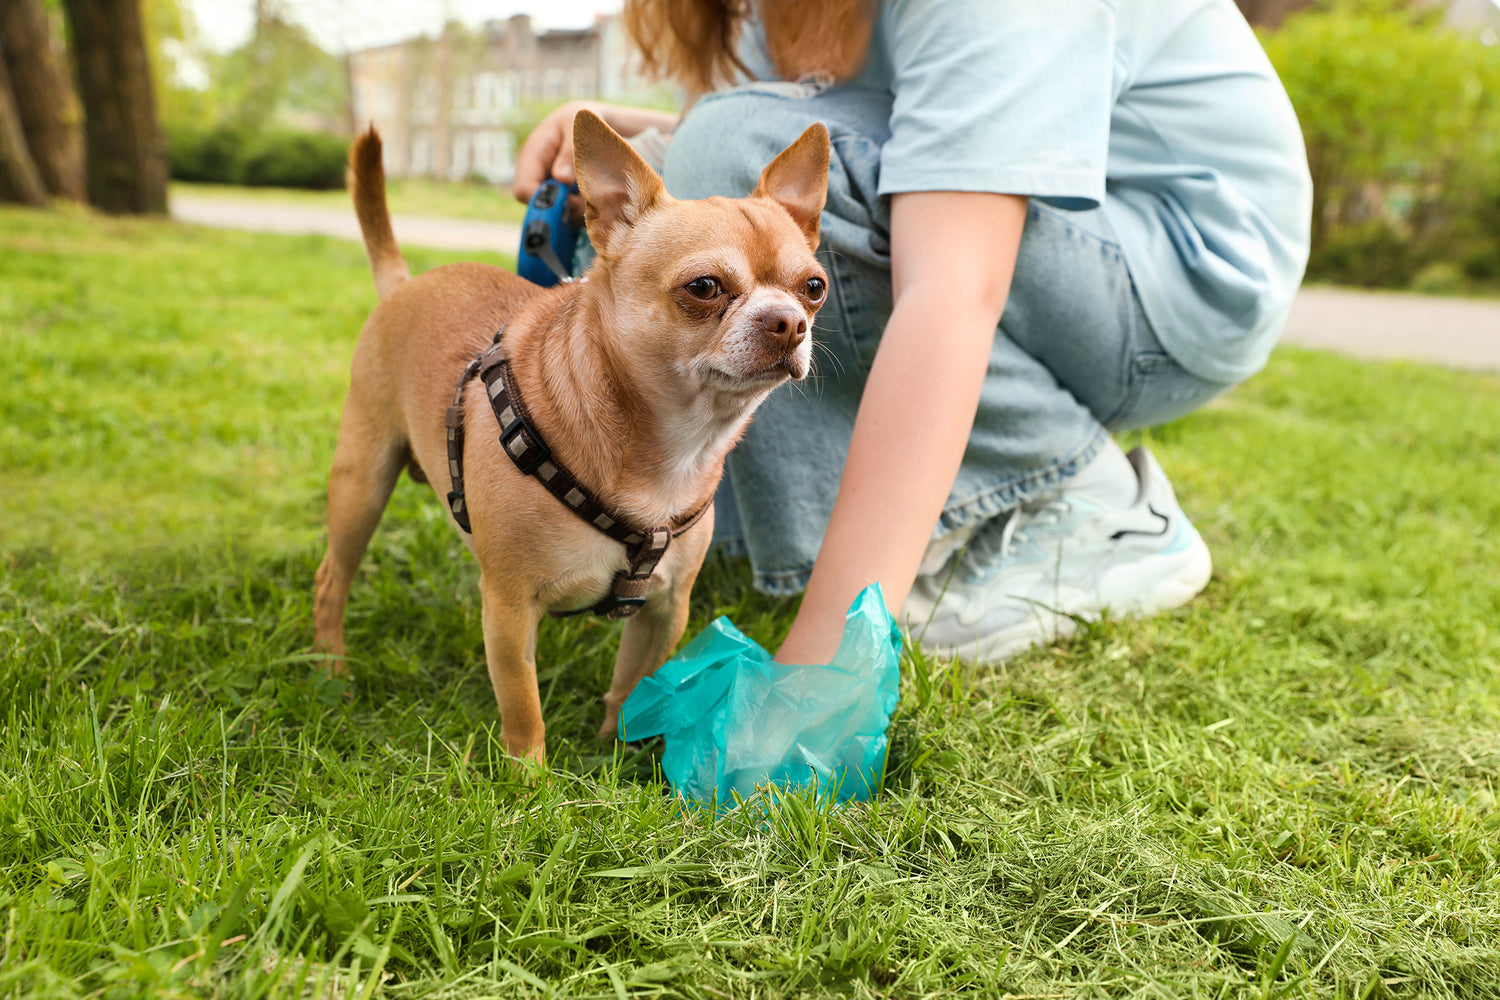 Are Dog Poop Bags Biodegradable? Busting Myths About Compostable Dog Poop Bags